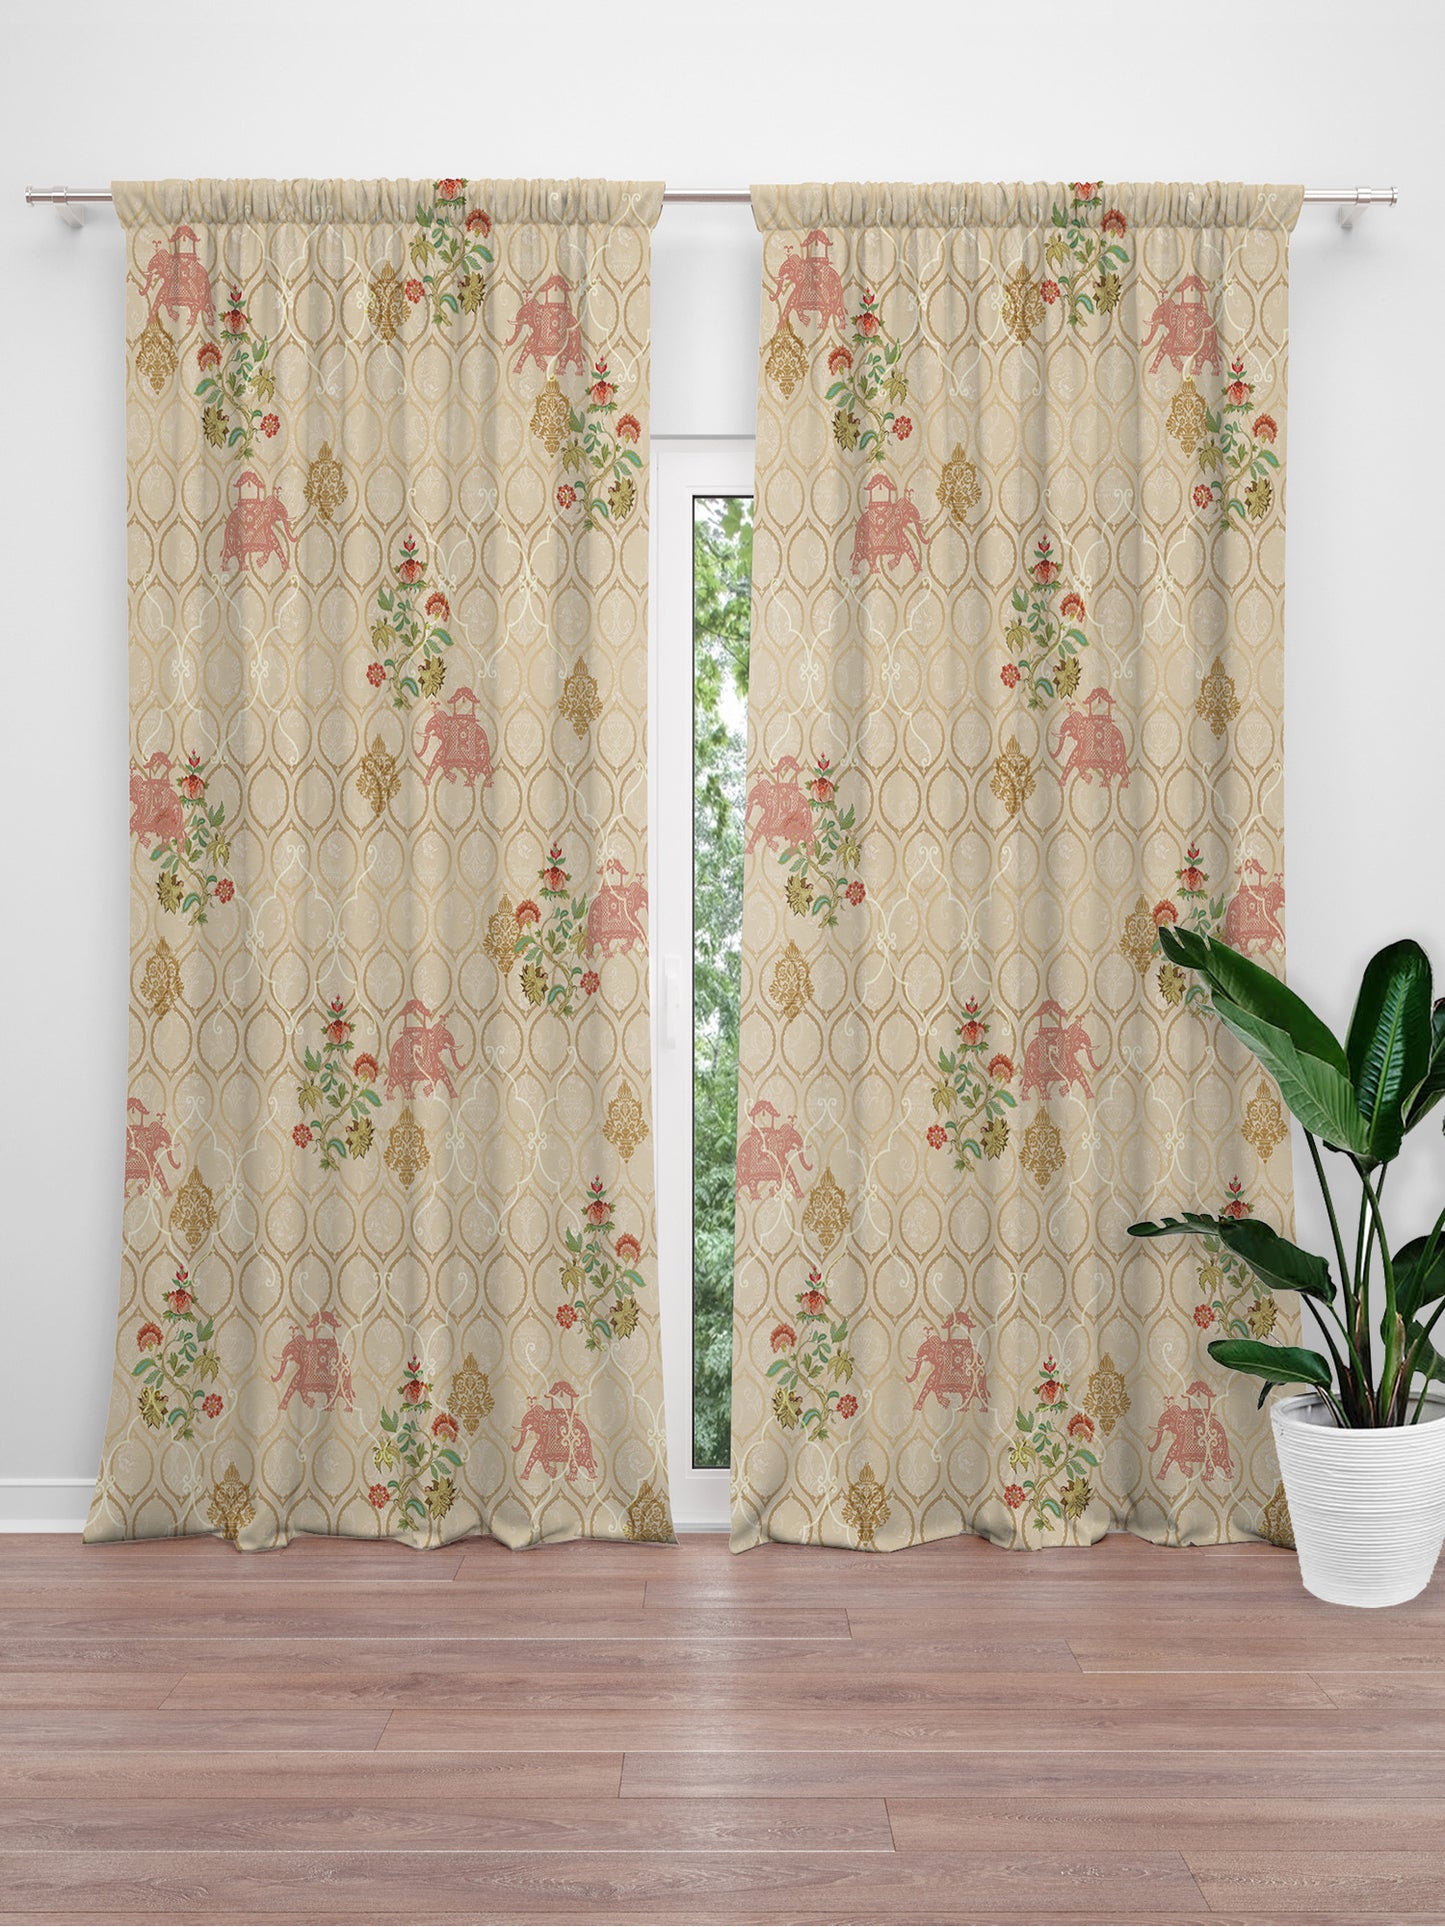 ZEBA World Room Darkening Blackout Door Curtain 7 Feet | Cotton Blend Curtain for Bedroom and Living Room with Hidden Loop | Mughal Garden Printed in Beige Color - 50x84 inches (Pack of 2)